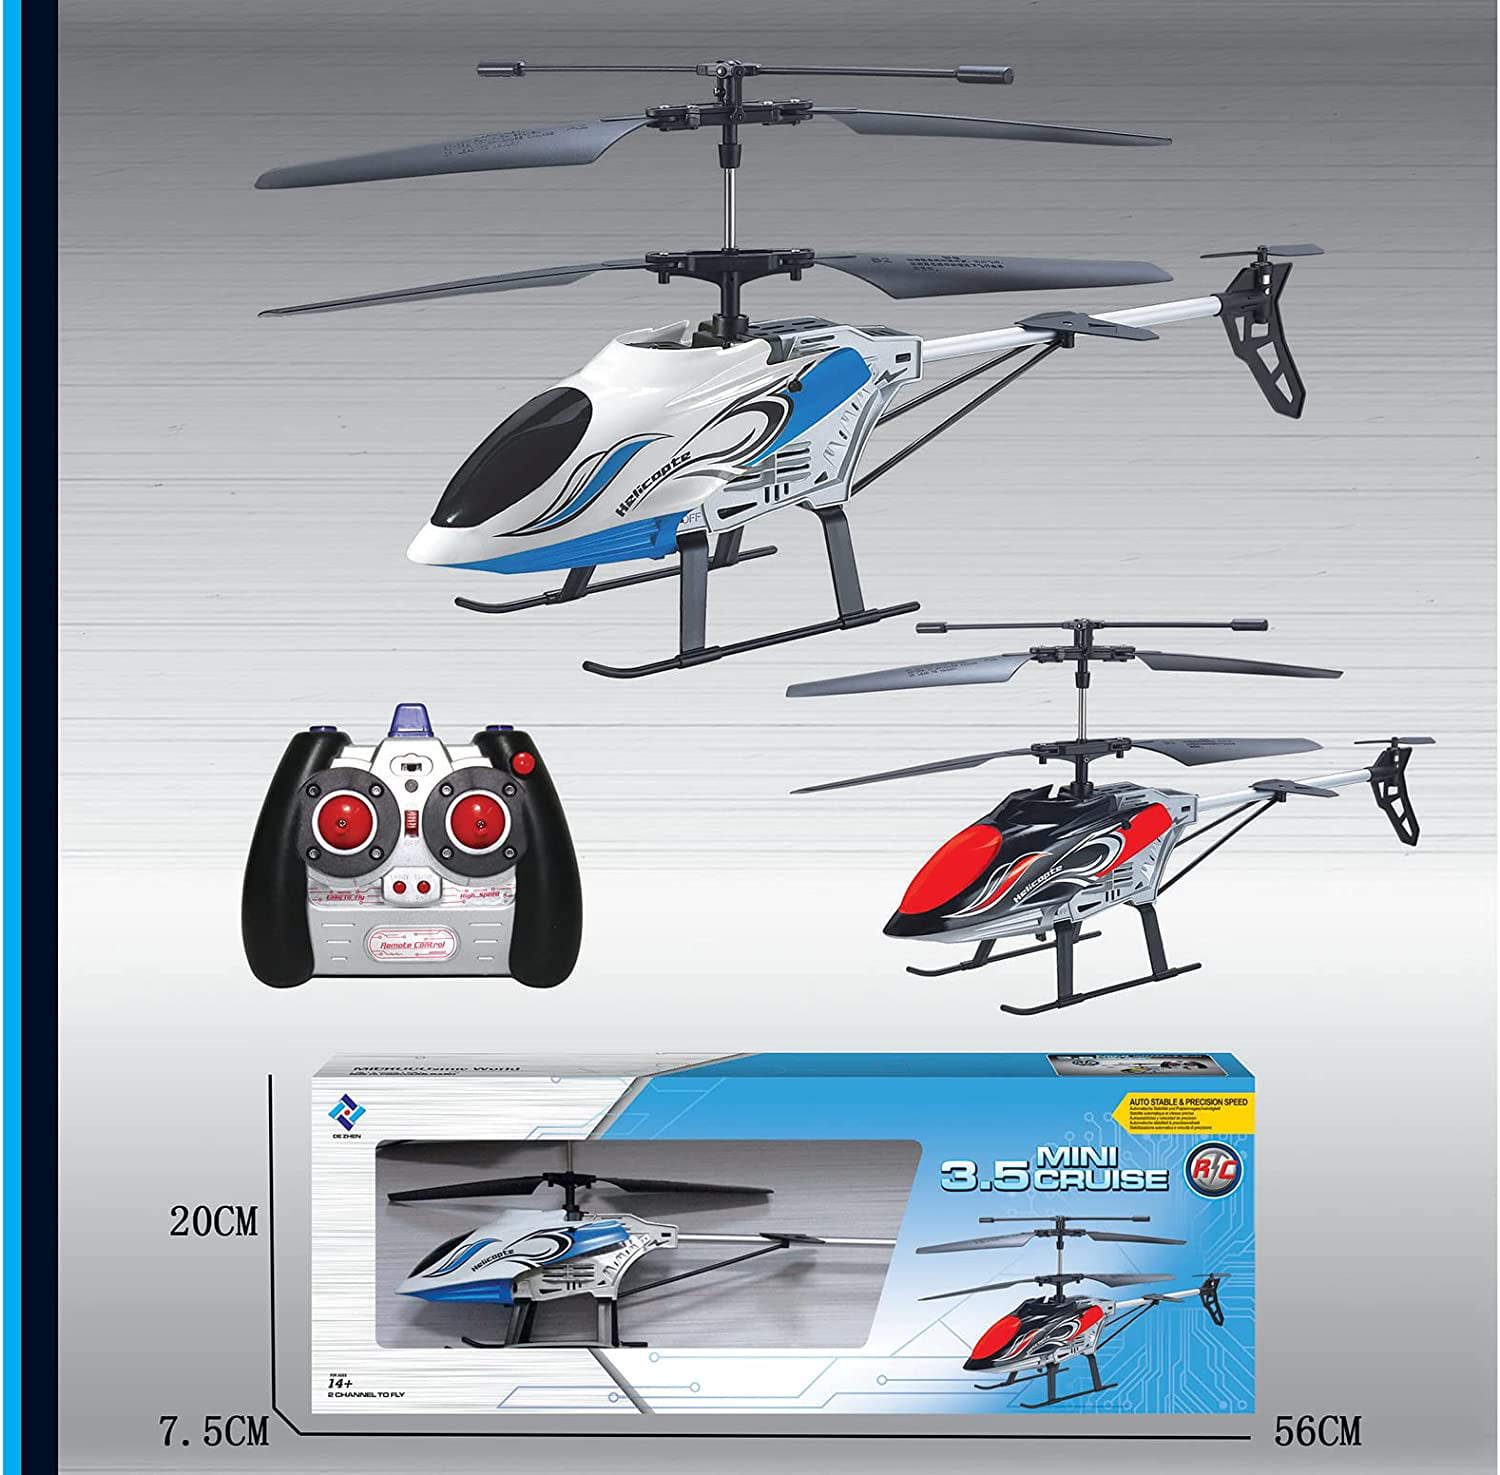 NEW Mini 3.5 Cruise Helicopter 